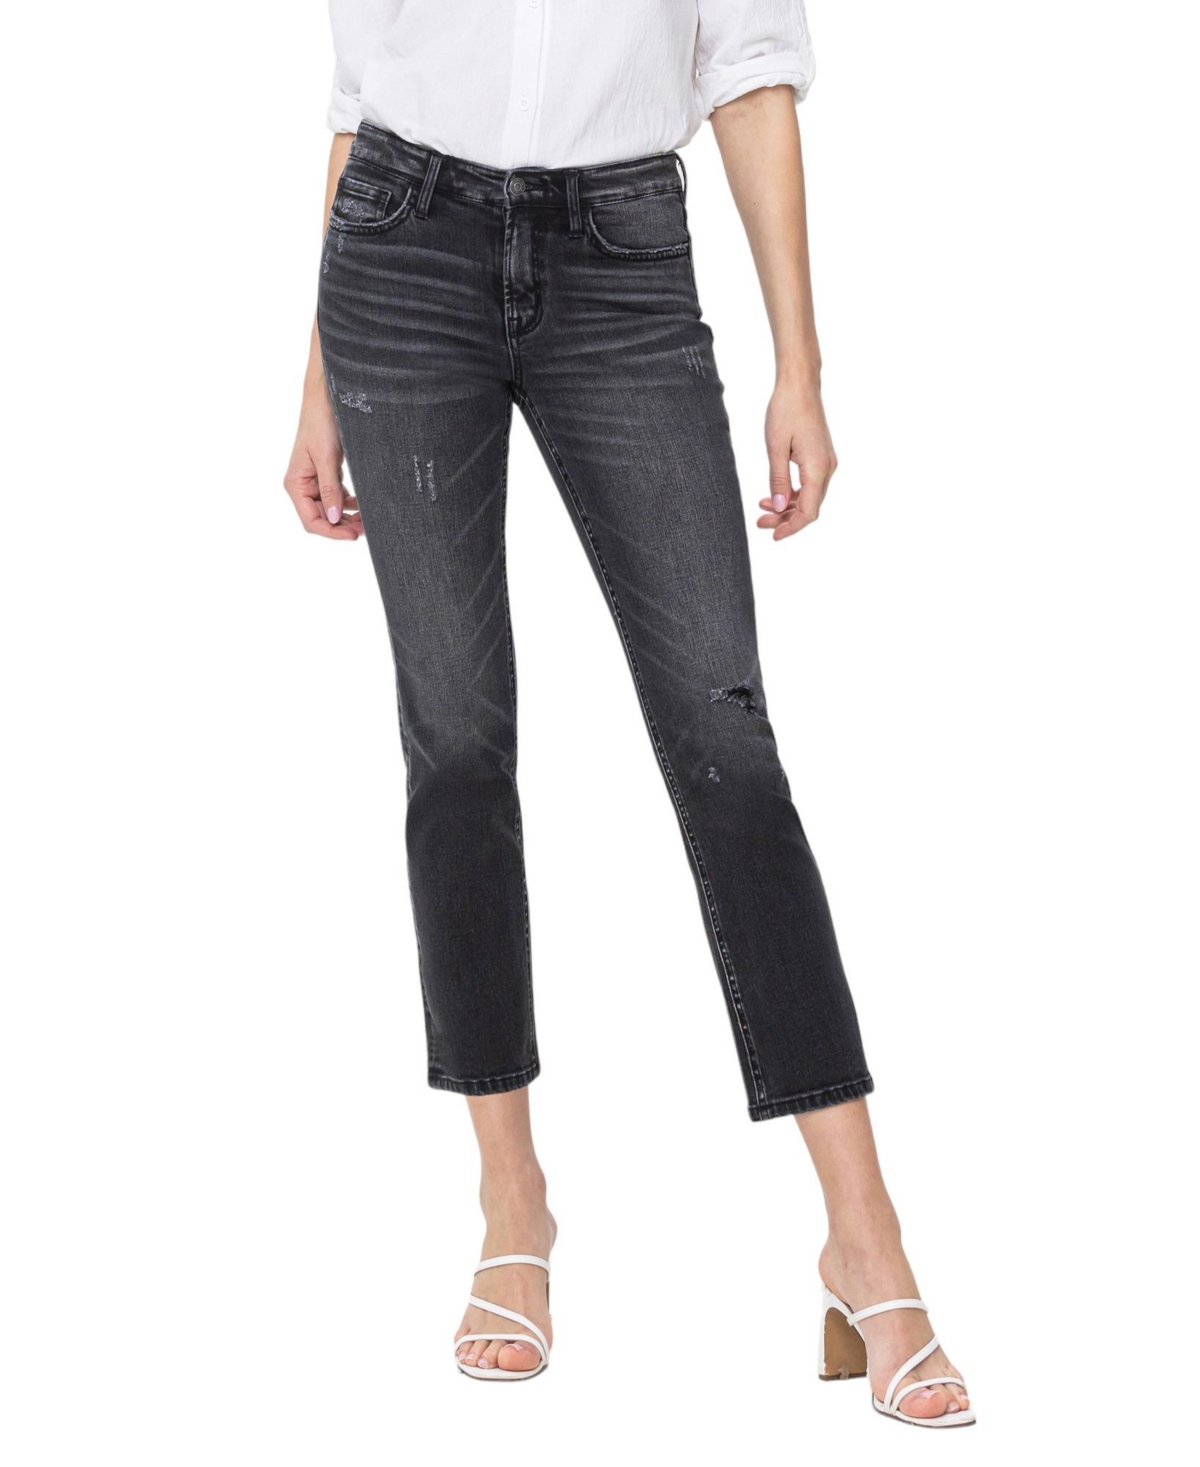 Women's Mid Rise Slim Straight Jeans - Wholeheartedly black